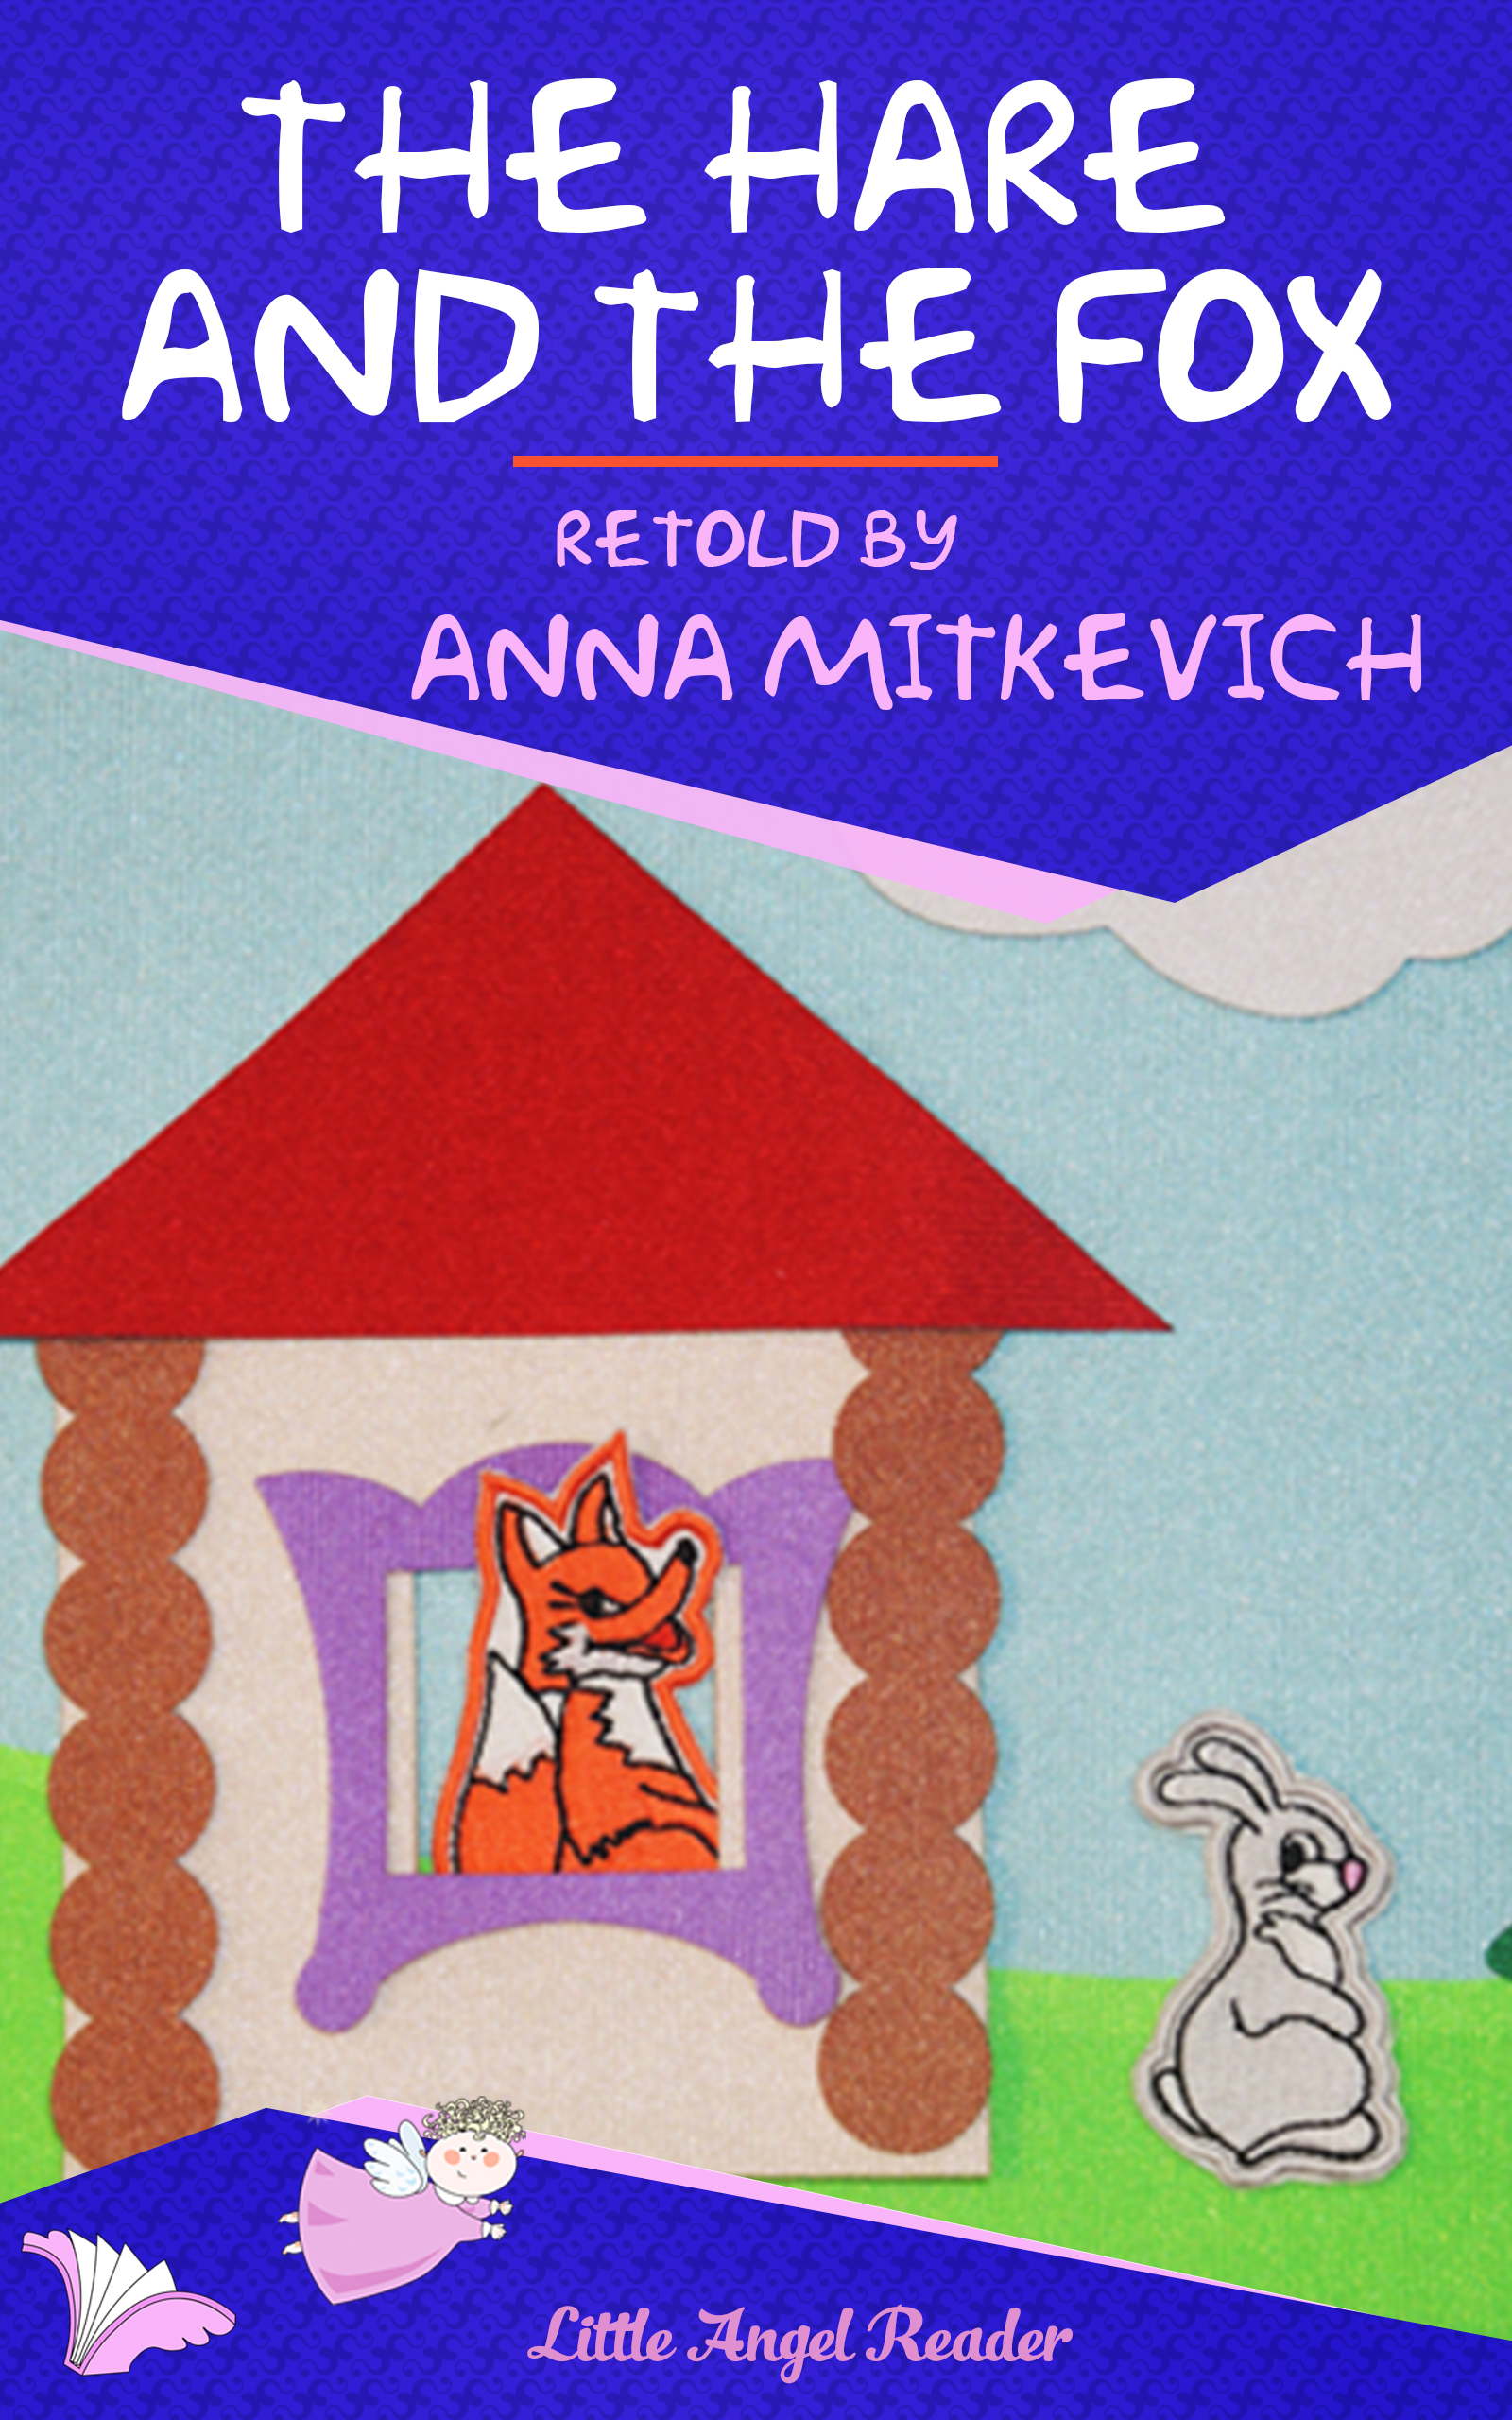 FREE: The Hare and the Fox by Anna Mitkevich